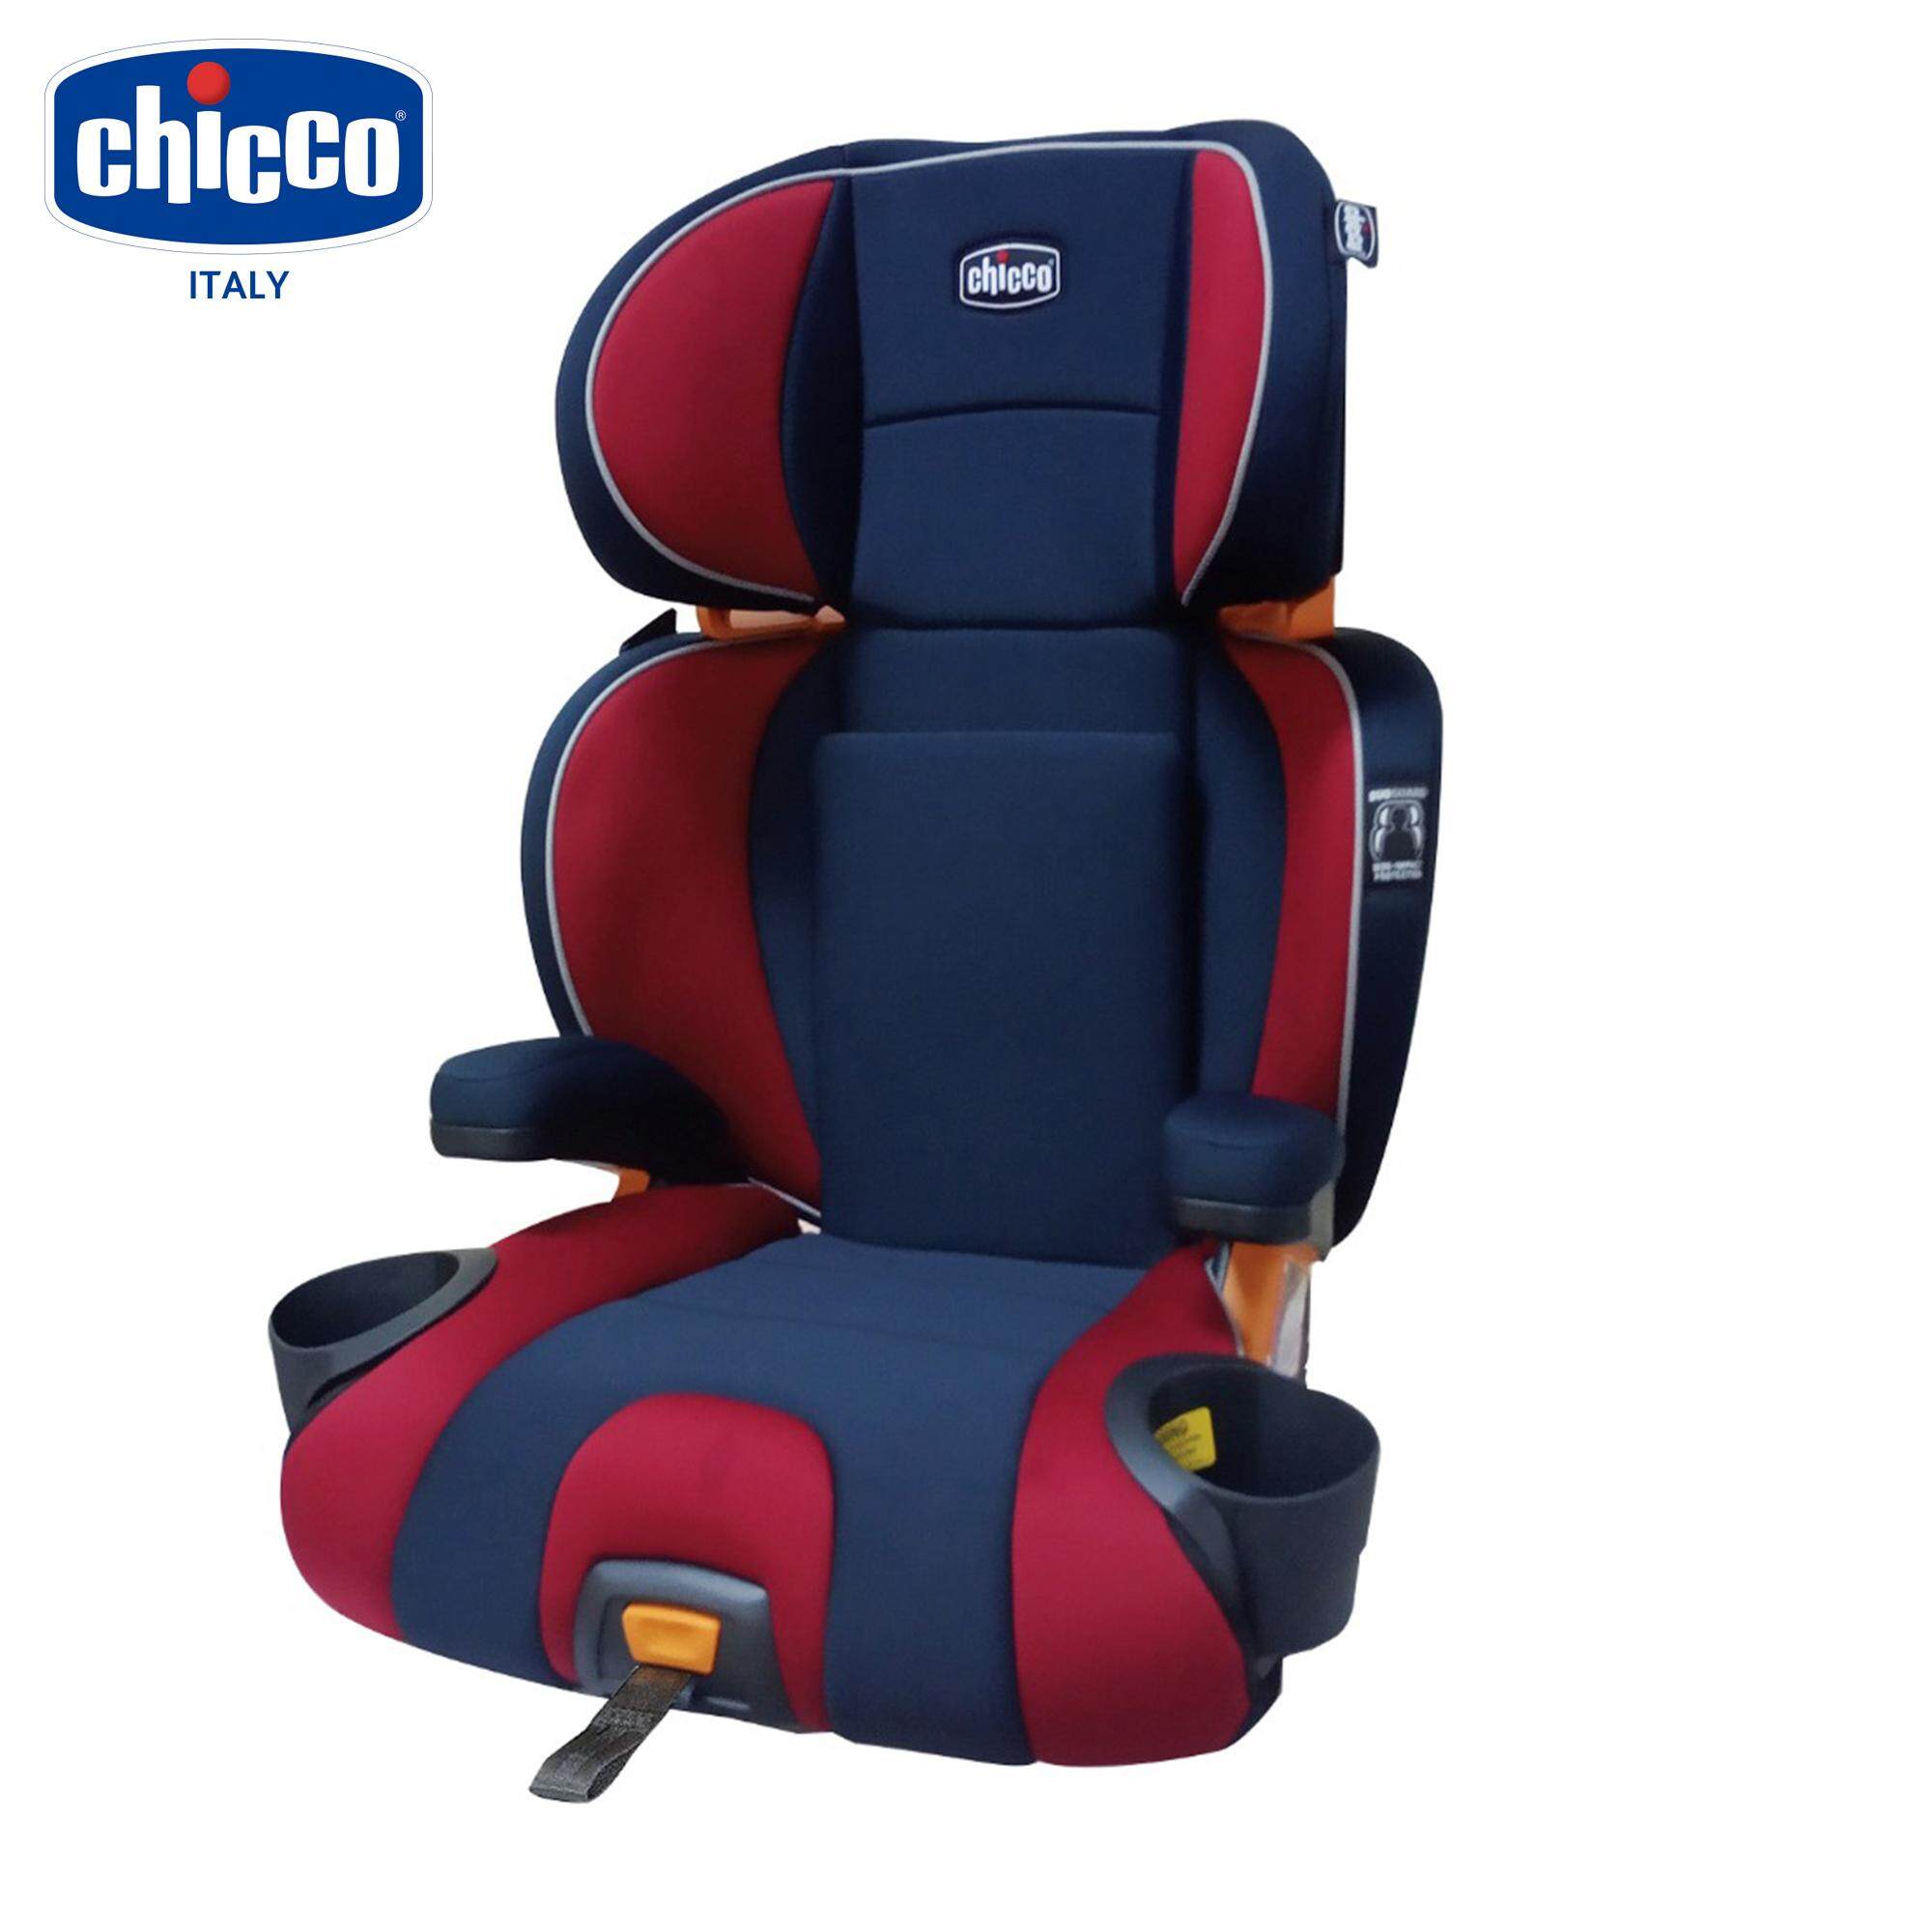 Chicco KidFit 2-in-1 Belt Positioning Booster Car Seat